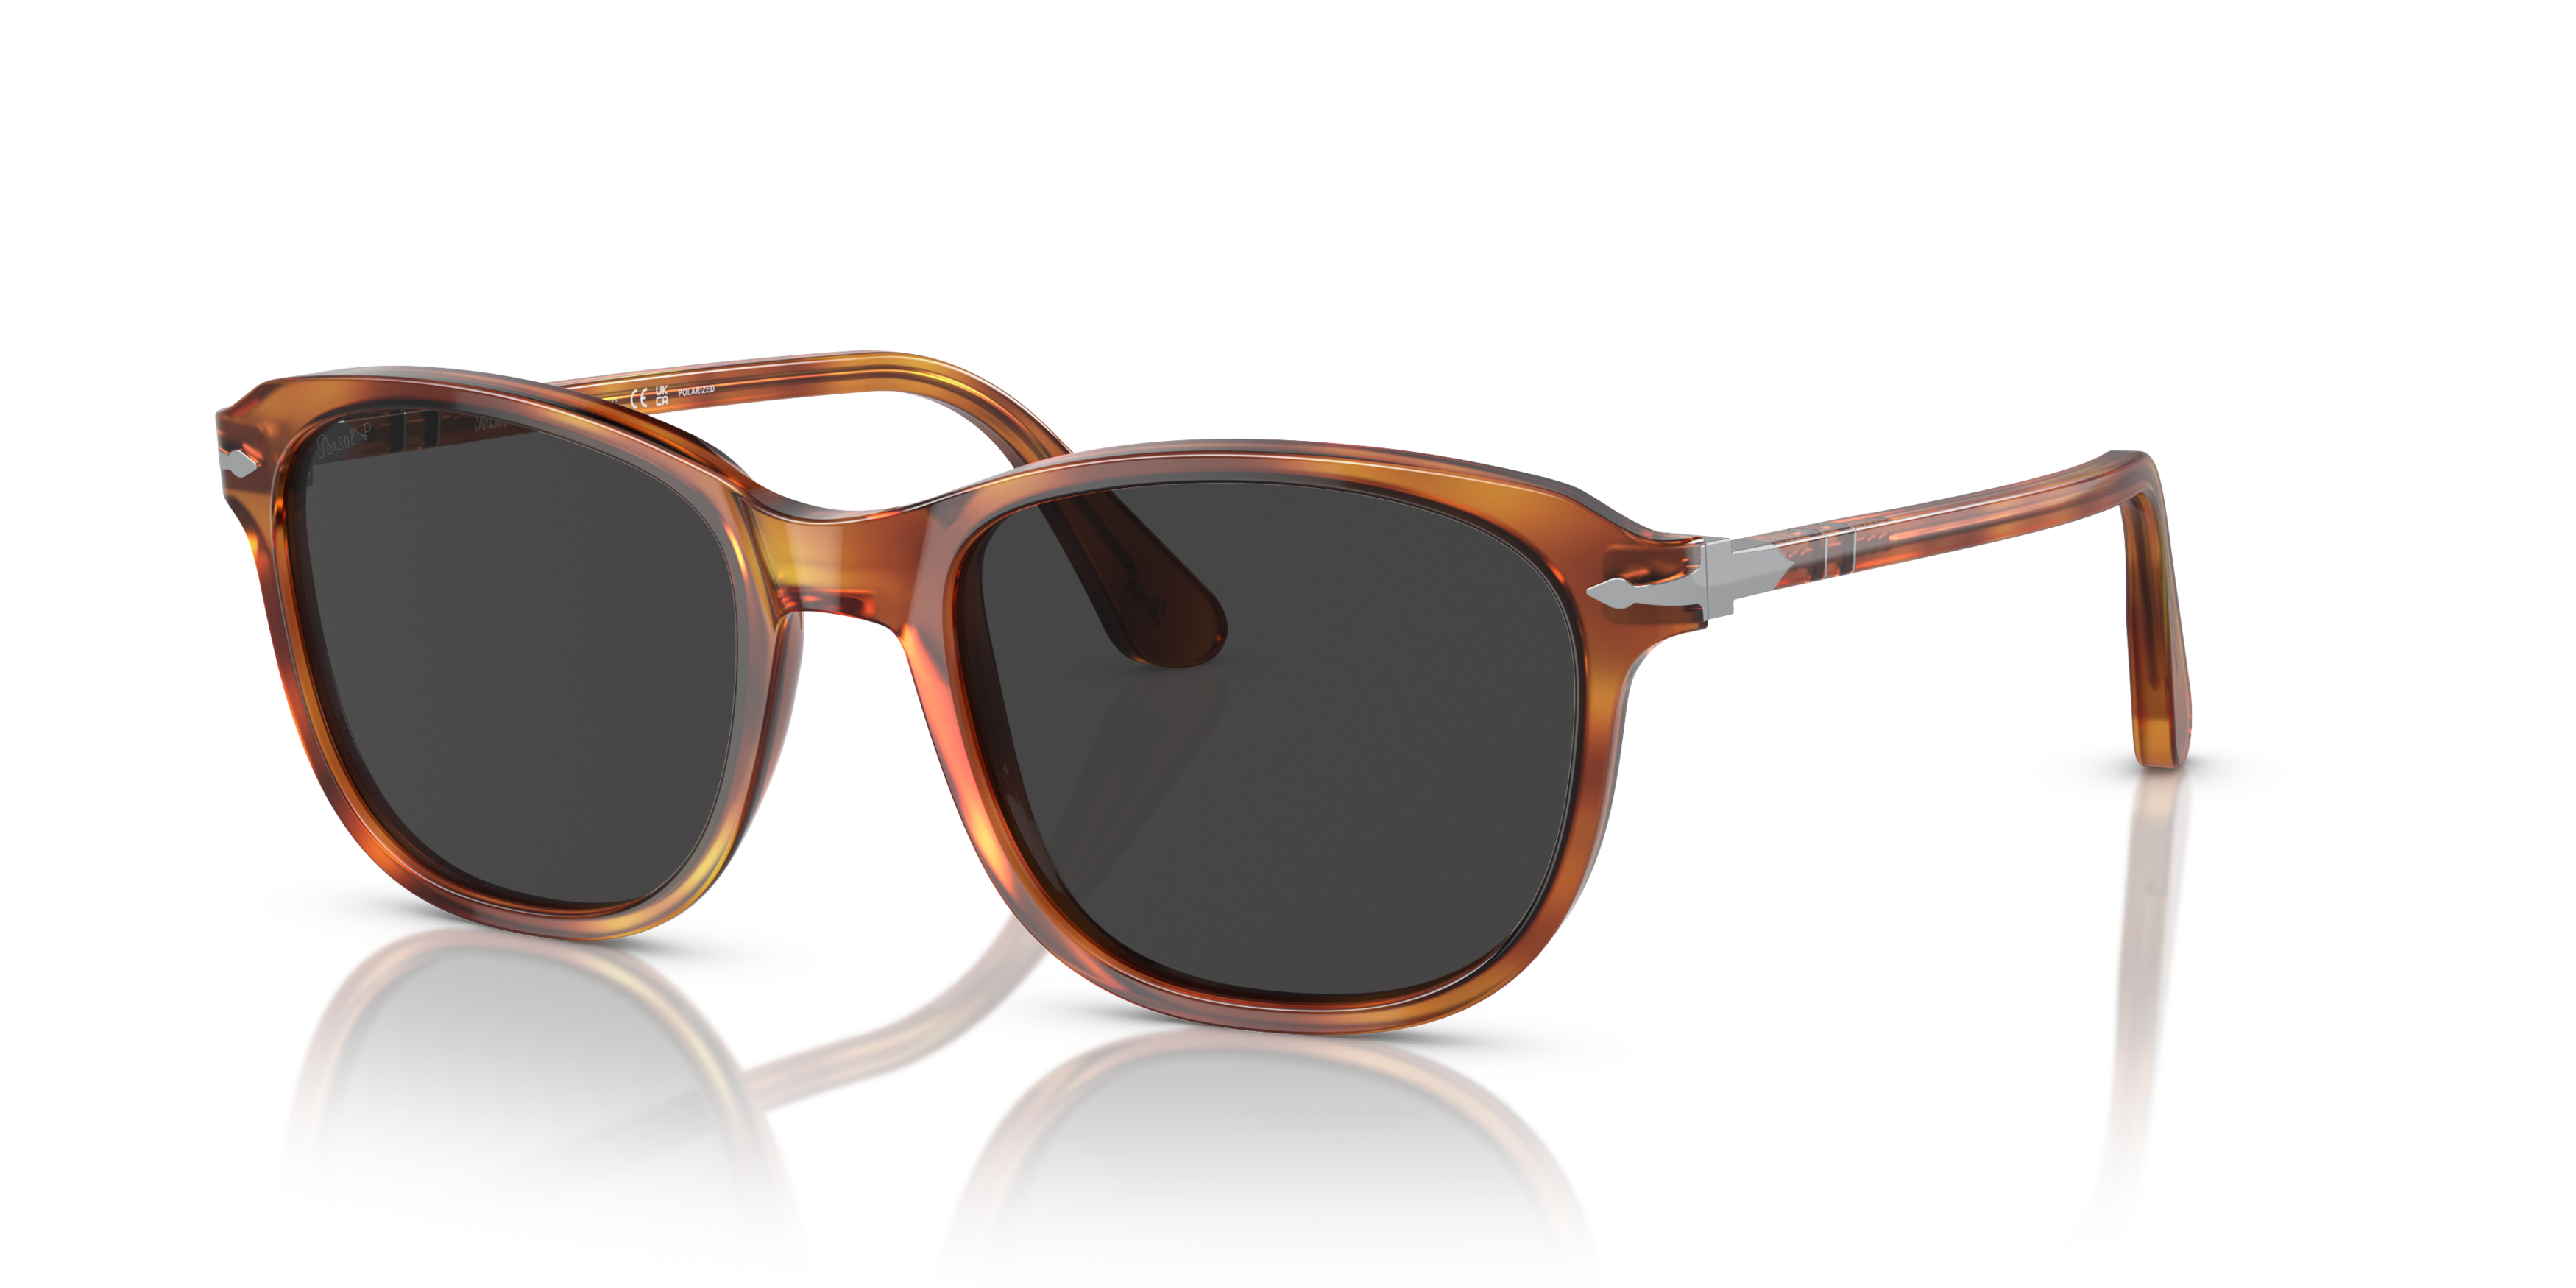 [products.image.angle_left01] Persol 0PO1935S 96/48